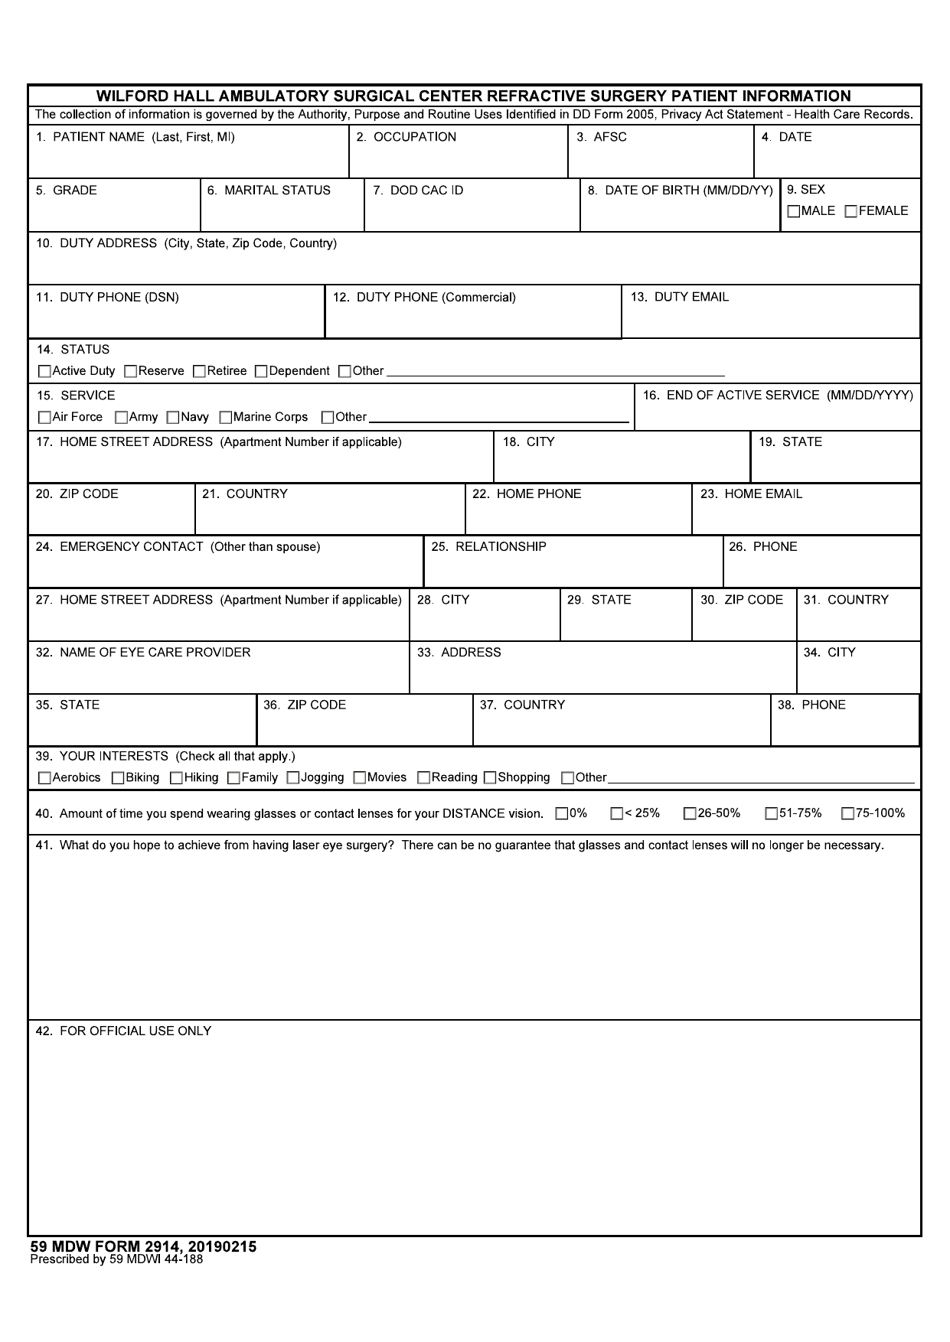 59 MDW Form 2914 Wilford Hall Ambulatory Surgical Center Refractive Surgery Patient Information, Page 1